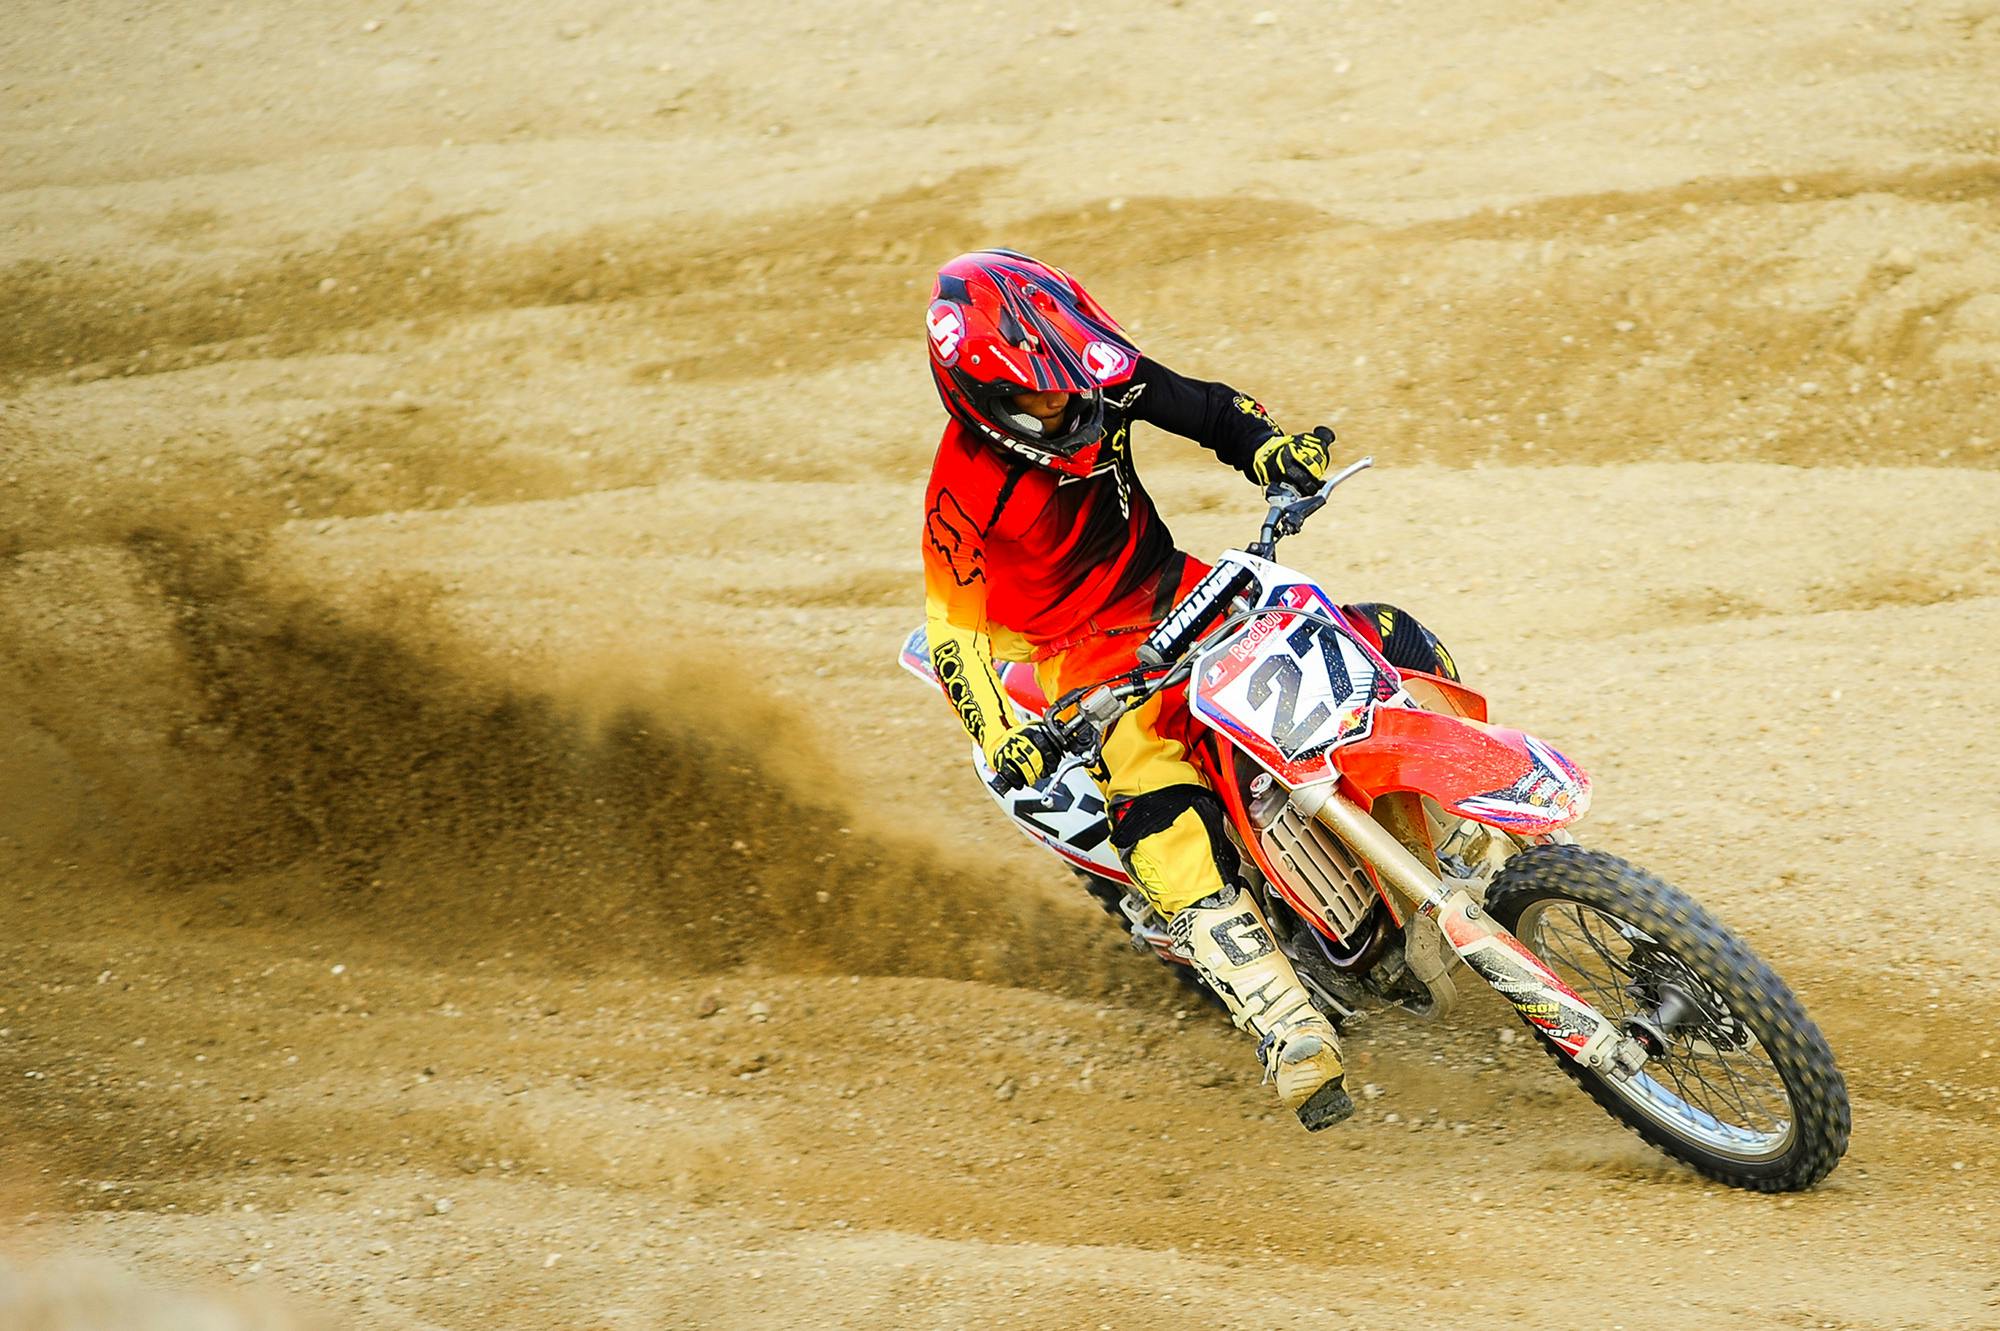 a person riding a dirt bike on a dirt track, pexels contest winner, red and yellow scheme, avatar image, sports photo, profile picture